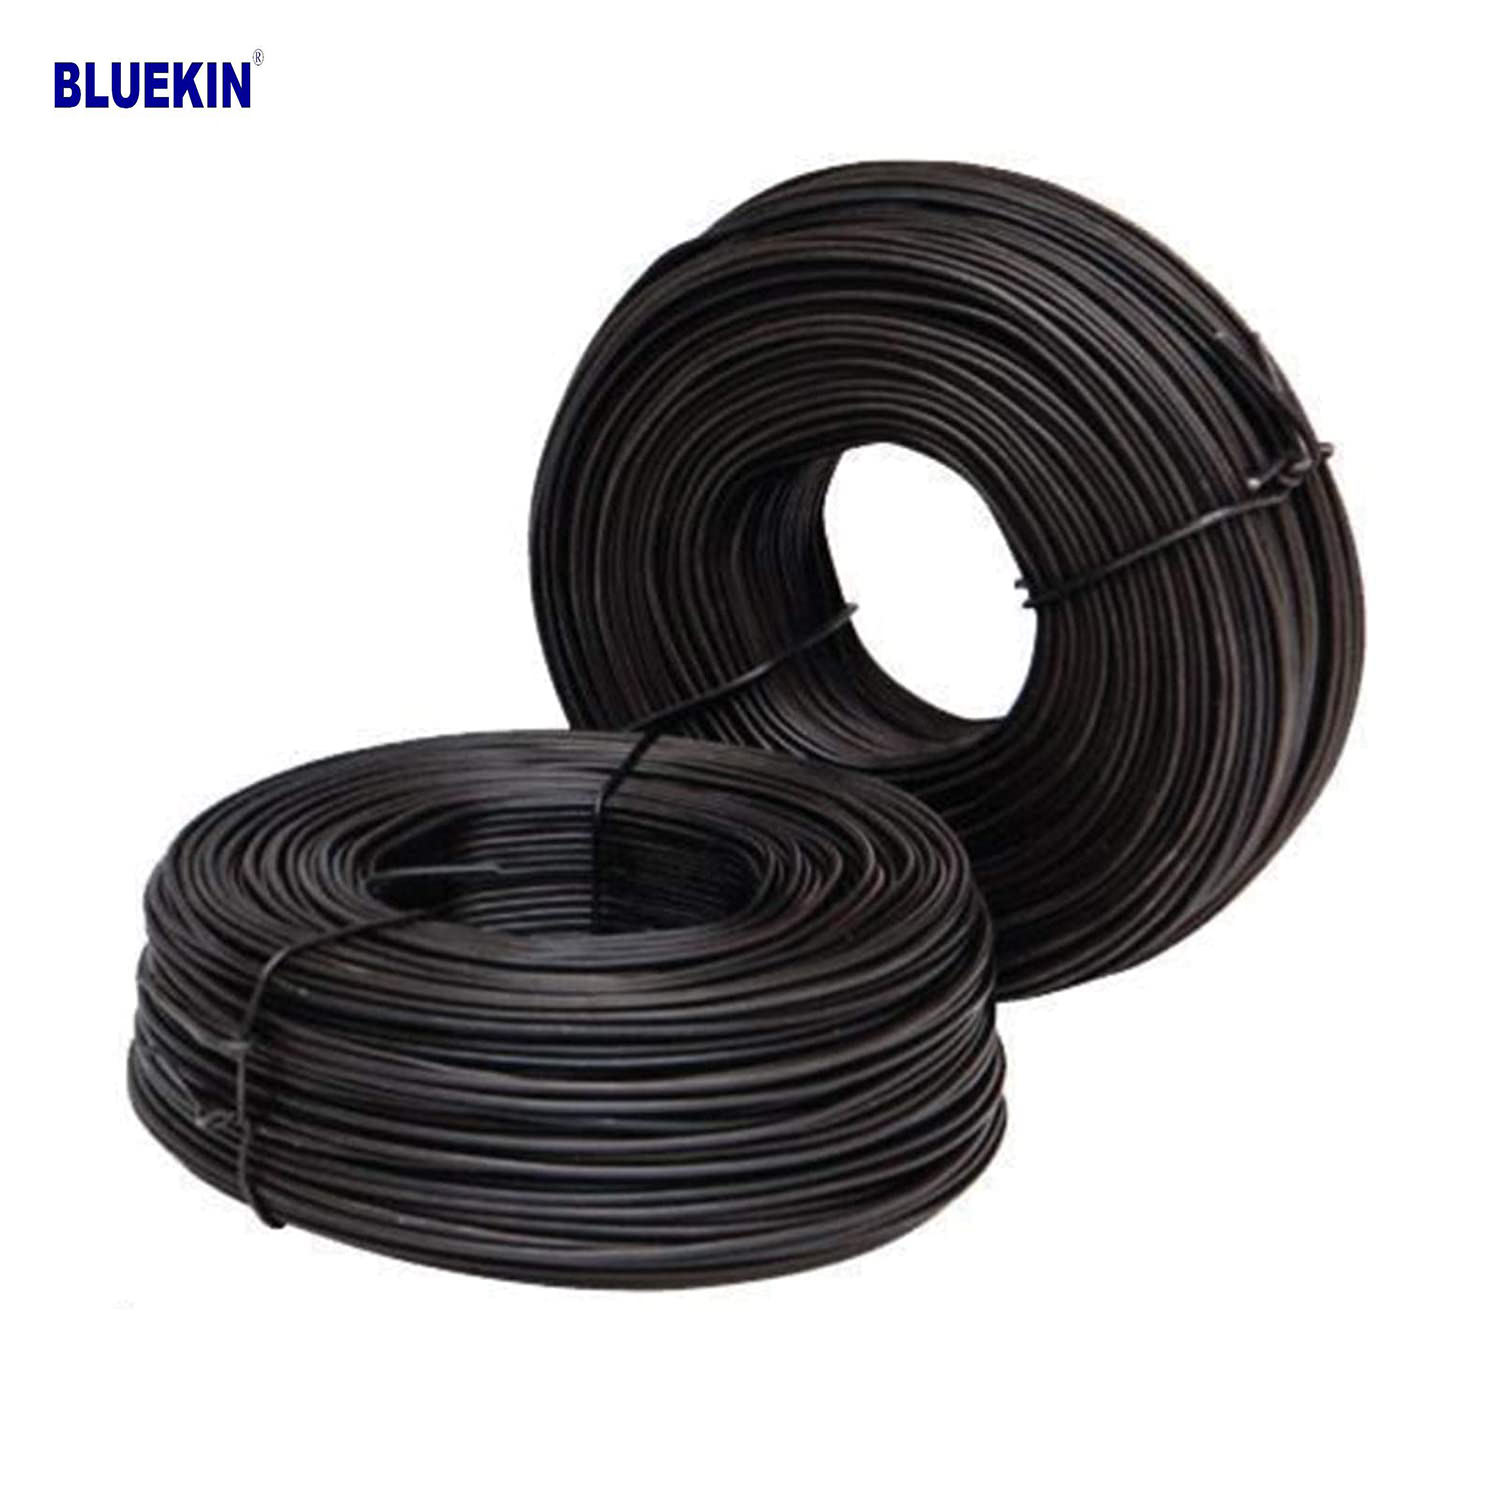 16ga 3.5lbs per coil  small rebar tie wire with aluminum rebar Tie Wire Reel Featured Image